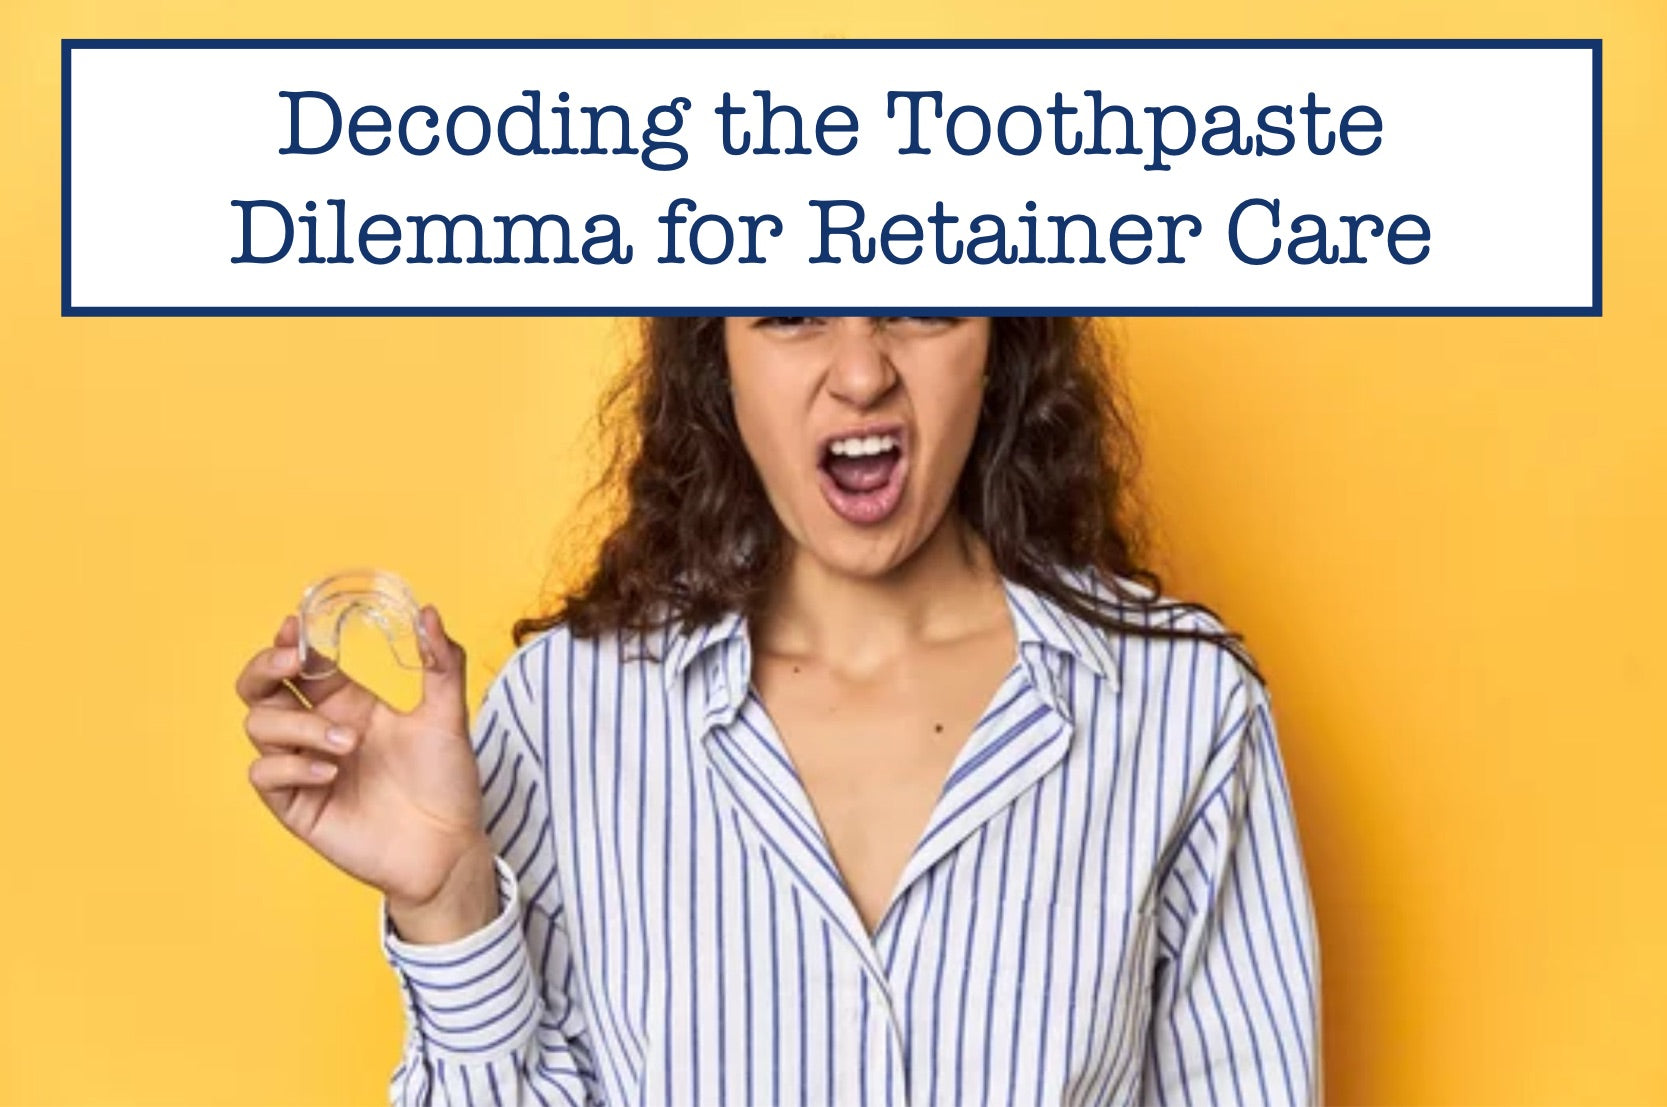 Decoding the Toothpaste Dilemma for Retainer Care